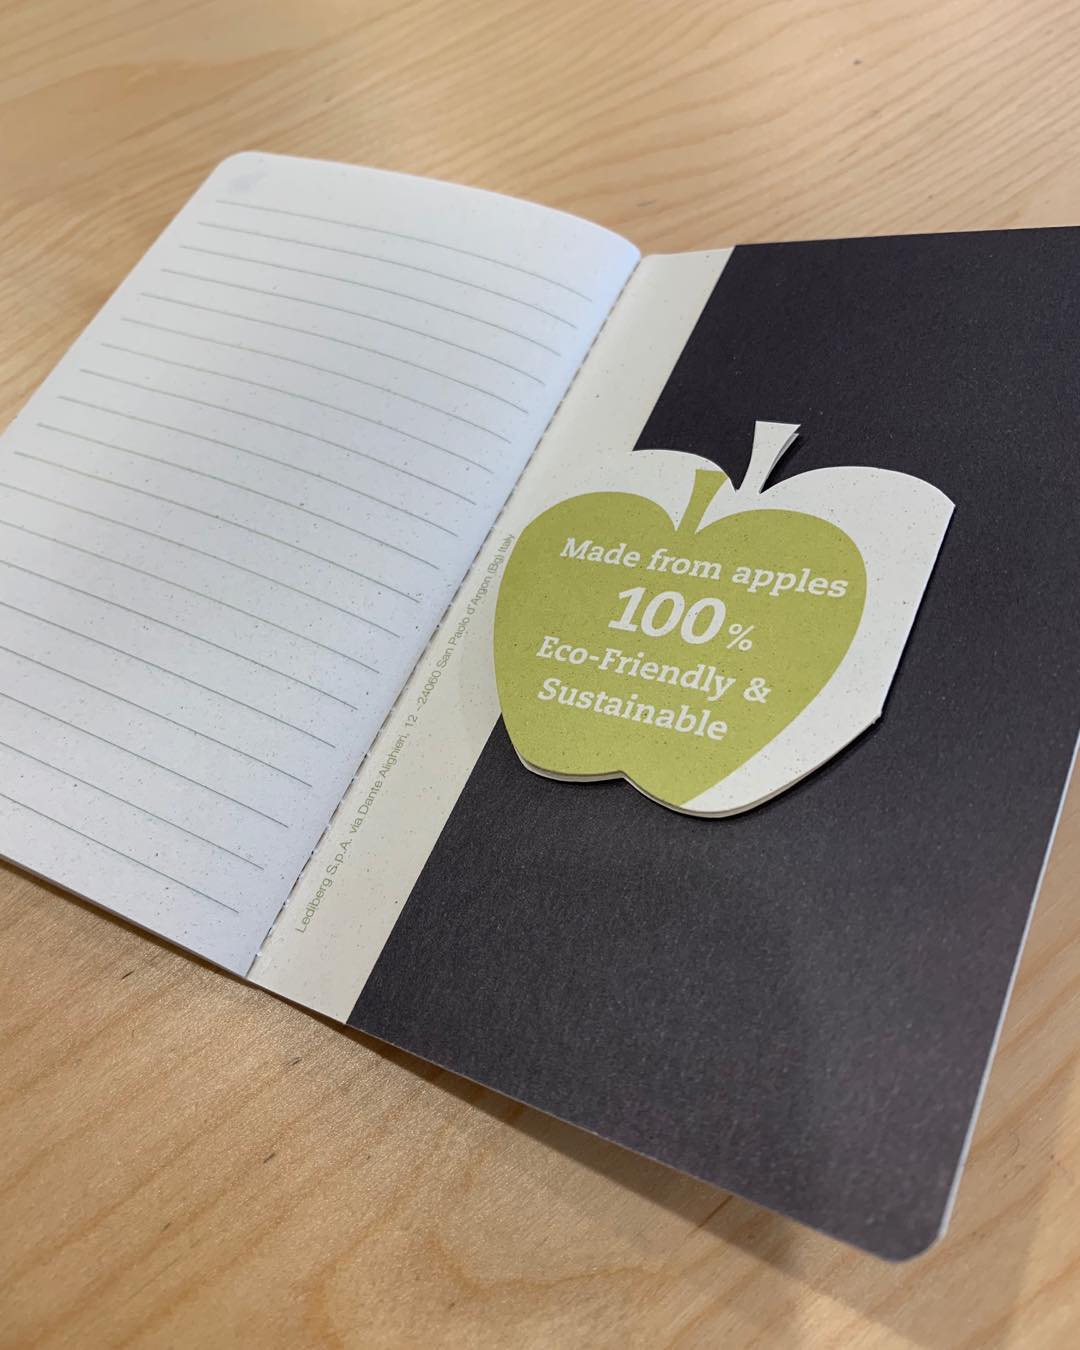 The only thing better than a journal is a journal that makes our office smell like apples. 🍎 🍏 😃  good for 🌏 & 🌳🌳. #journals  #apples #ecofriendly